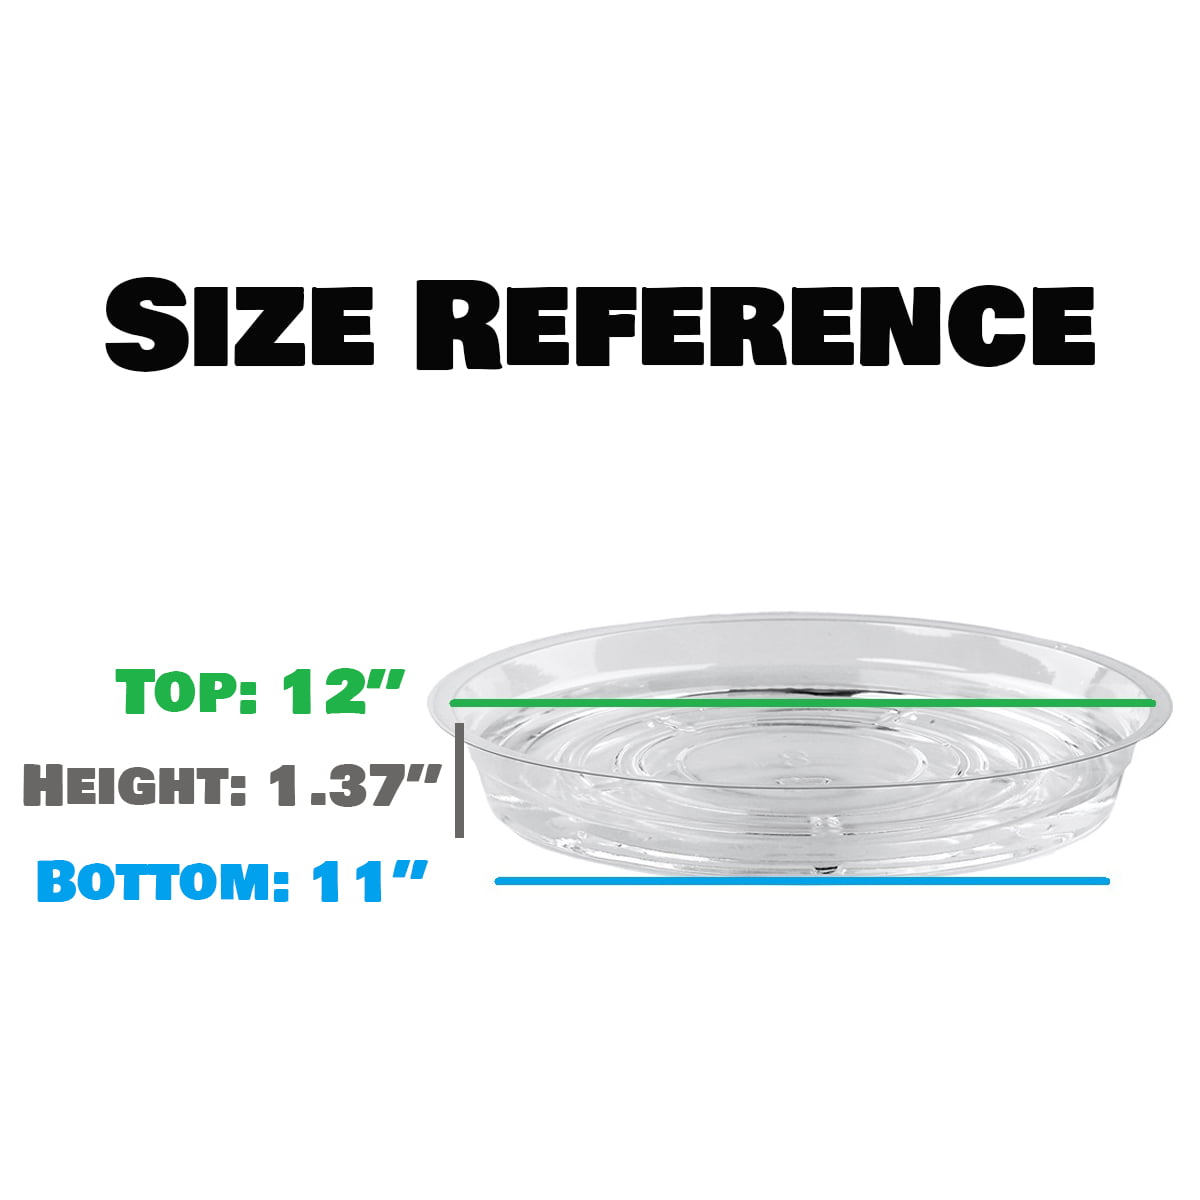 10Pack 6.8.10 Round Clear Plant Saucer Drip Tray Garden Plastic Flower Pot Base 